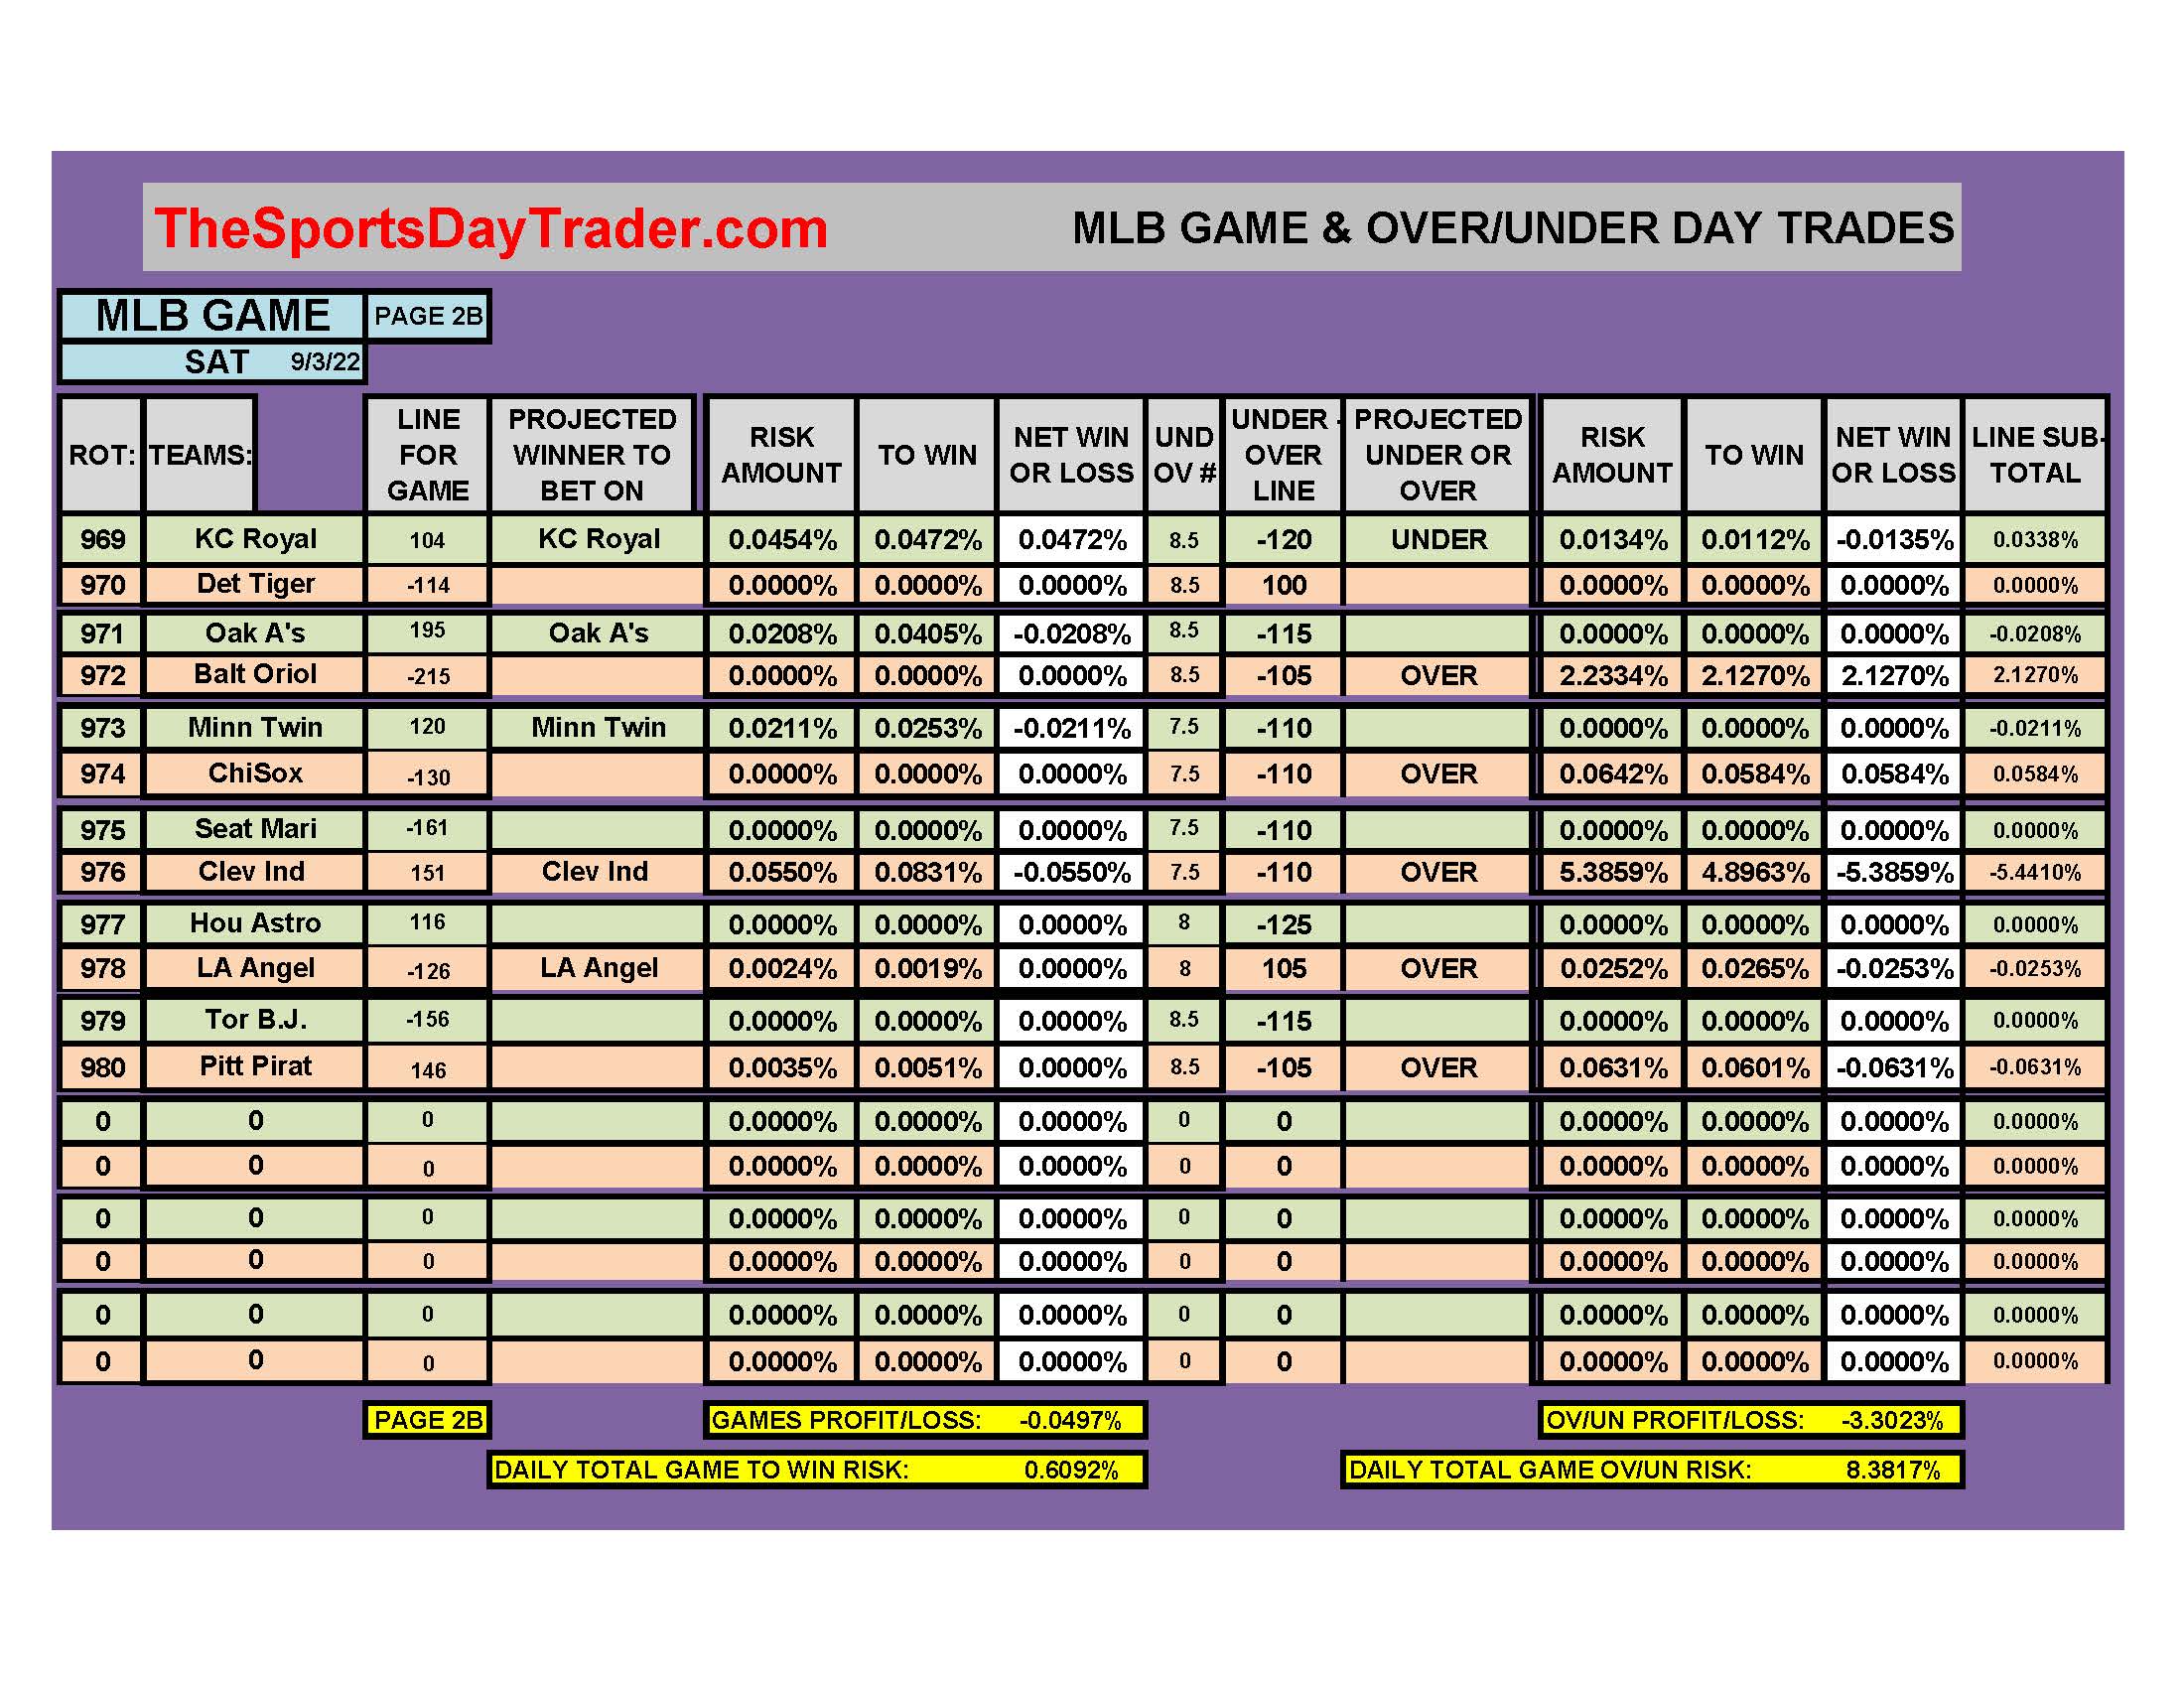 MLB 9/3/22 GAME DAILY RESULTS page 2